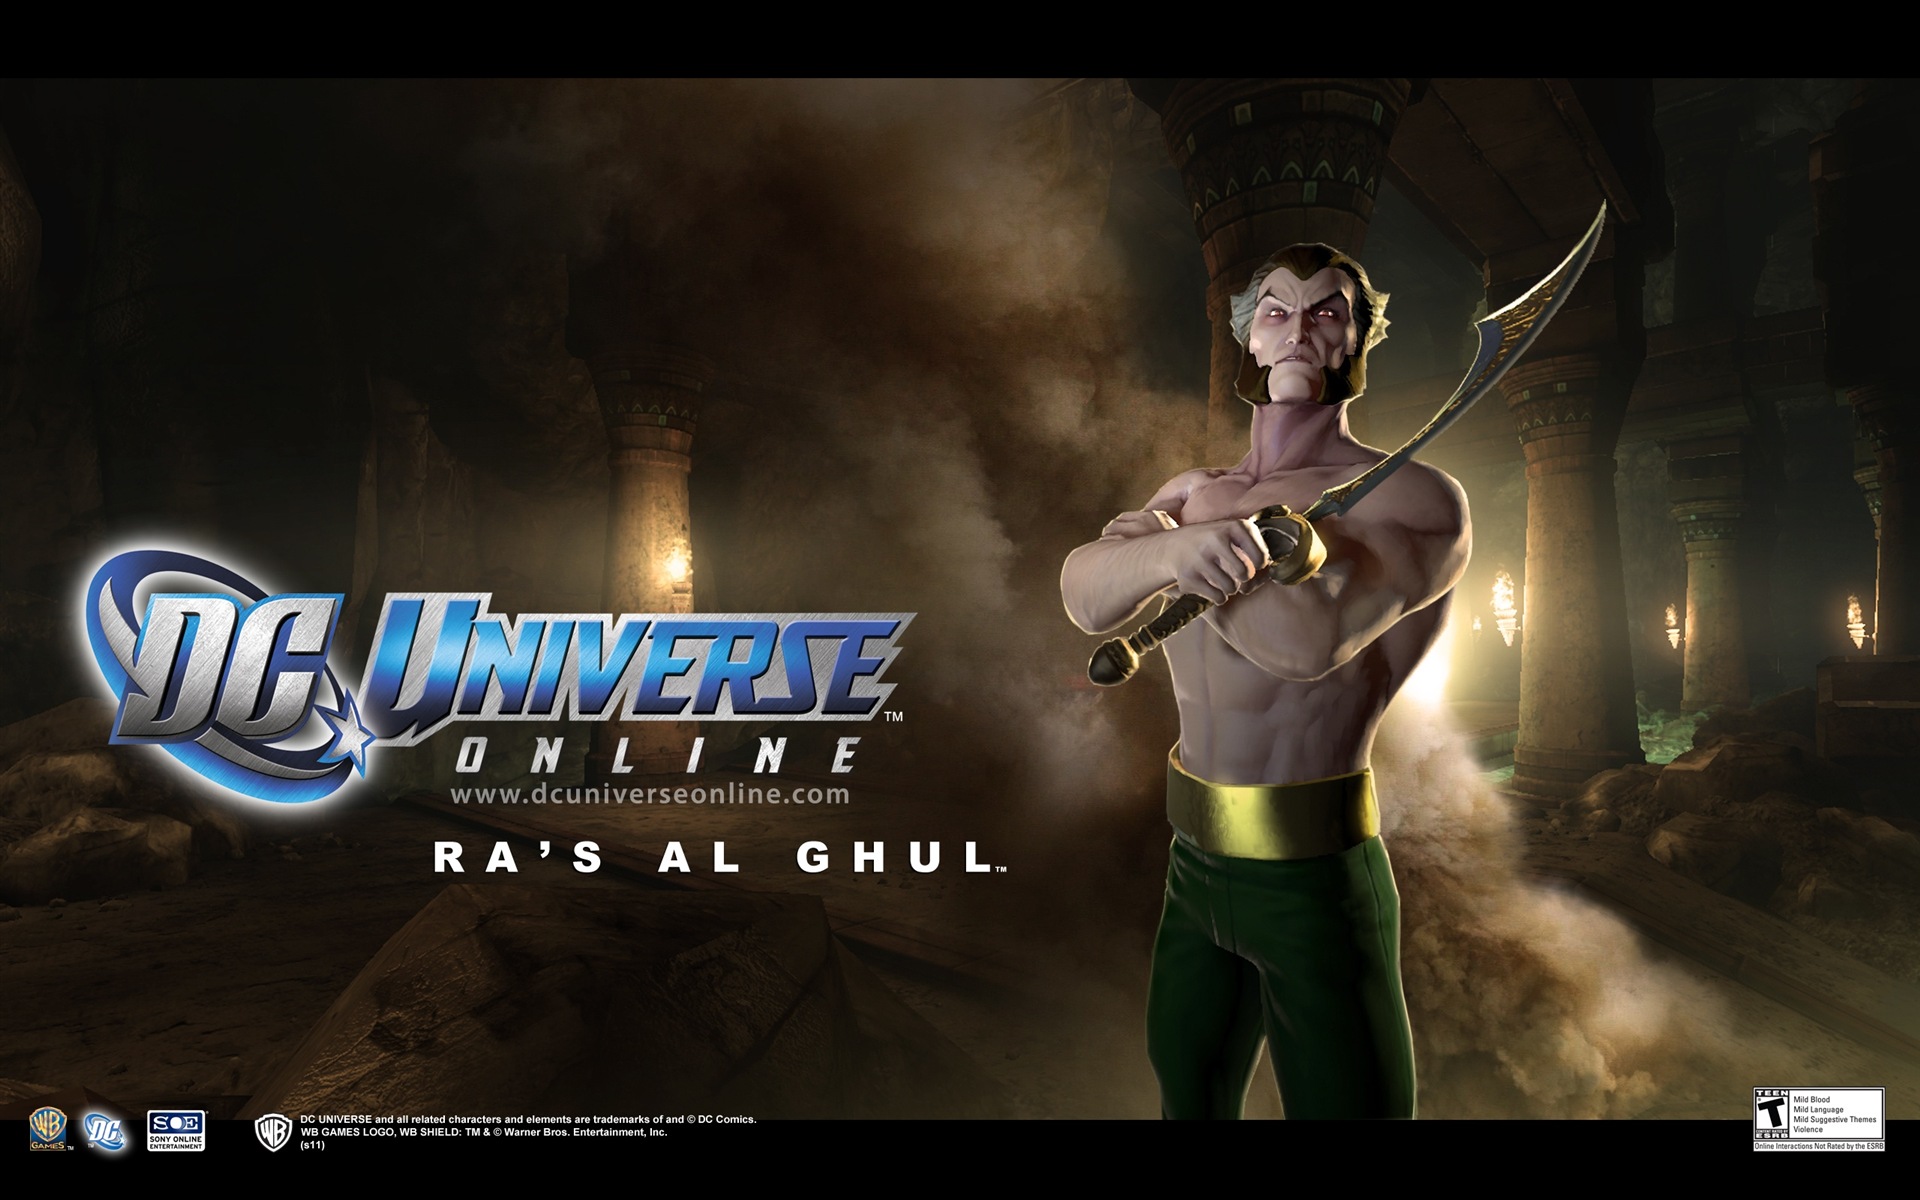 DC Universe Online HD game wallpapers #8 - 1920x1200